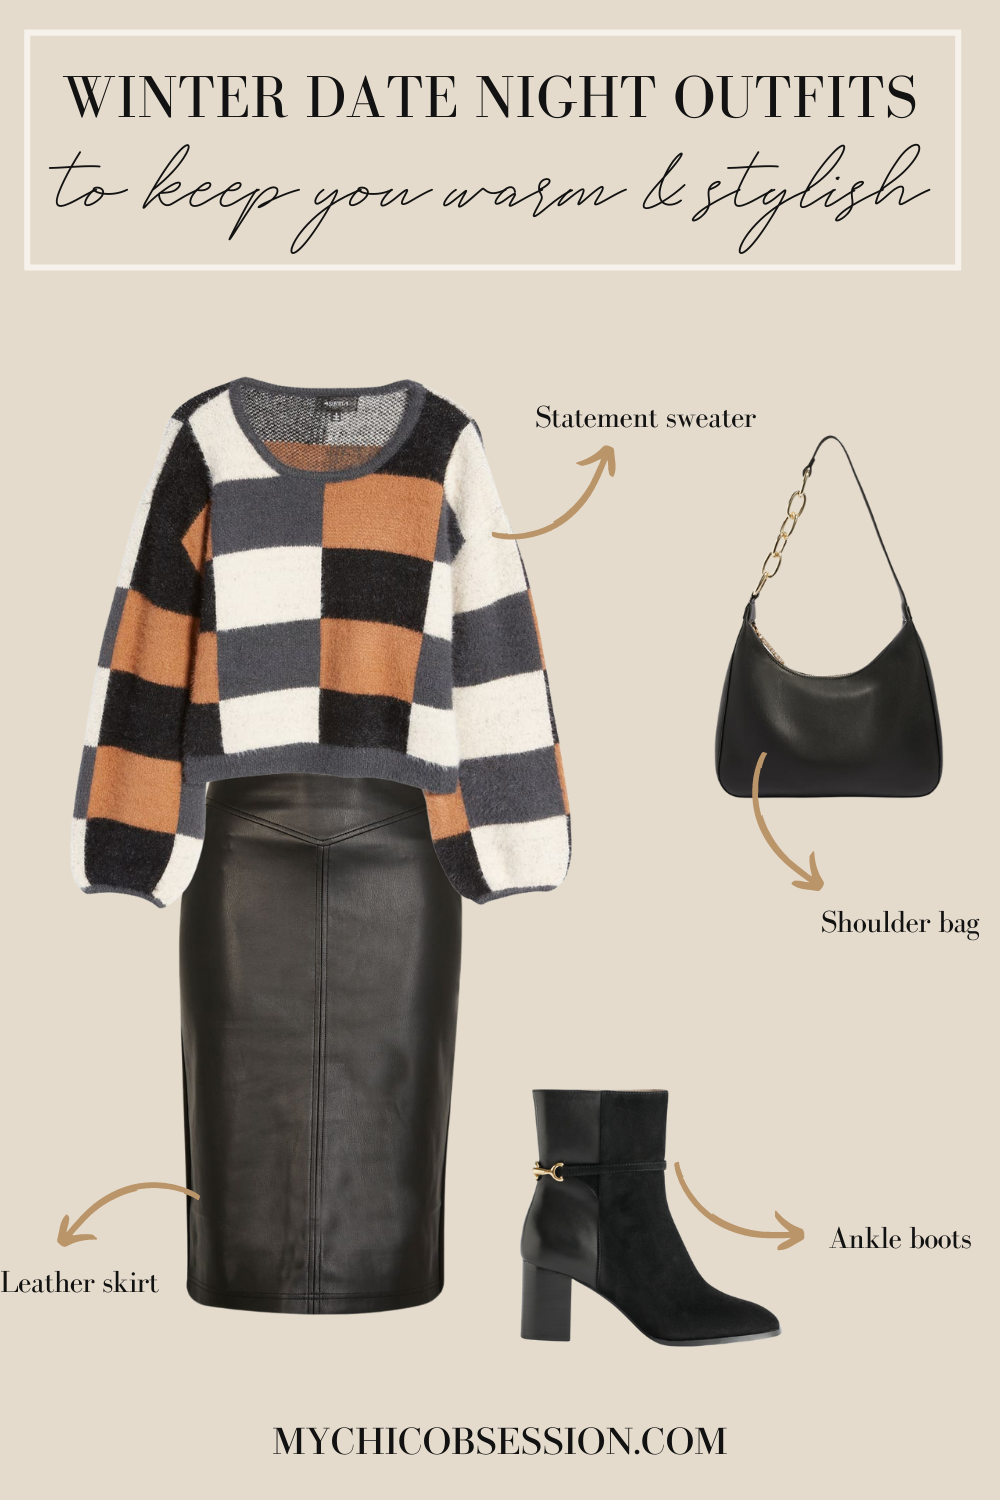 Winter date night lookbook with leather skirt